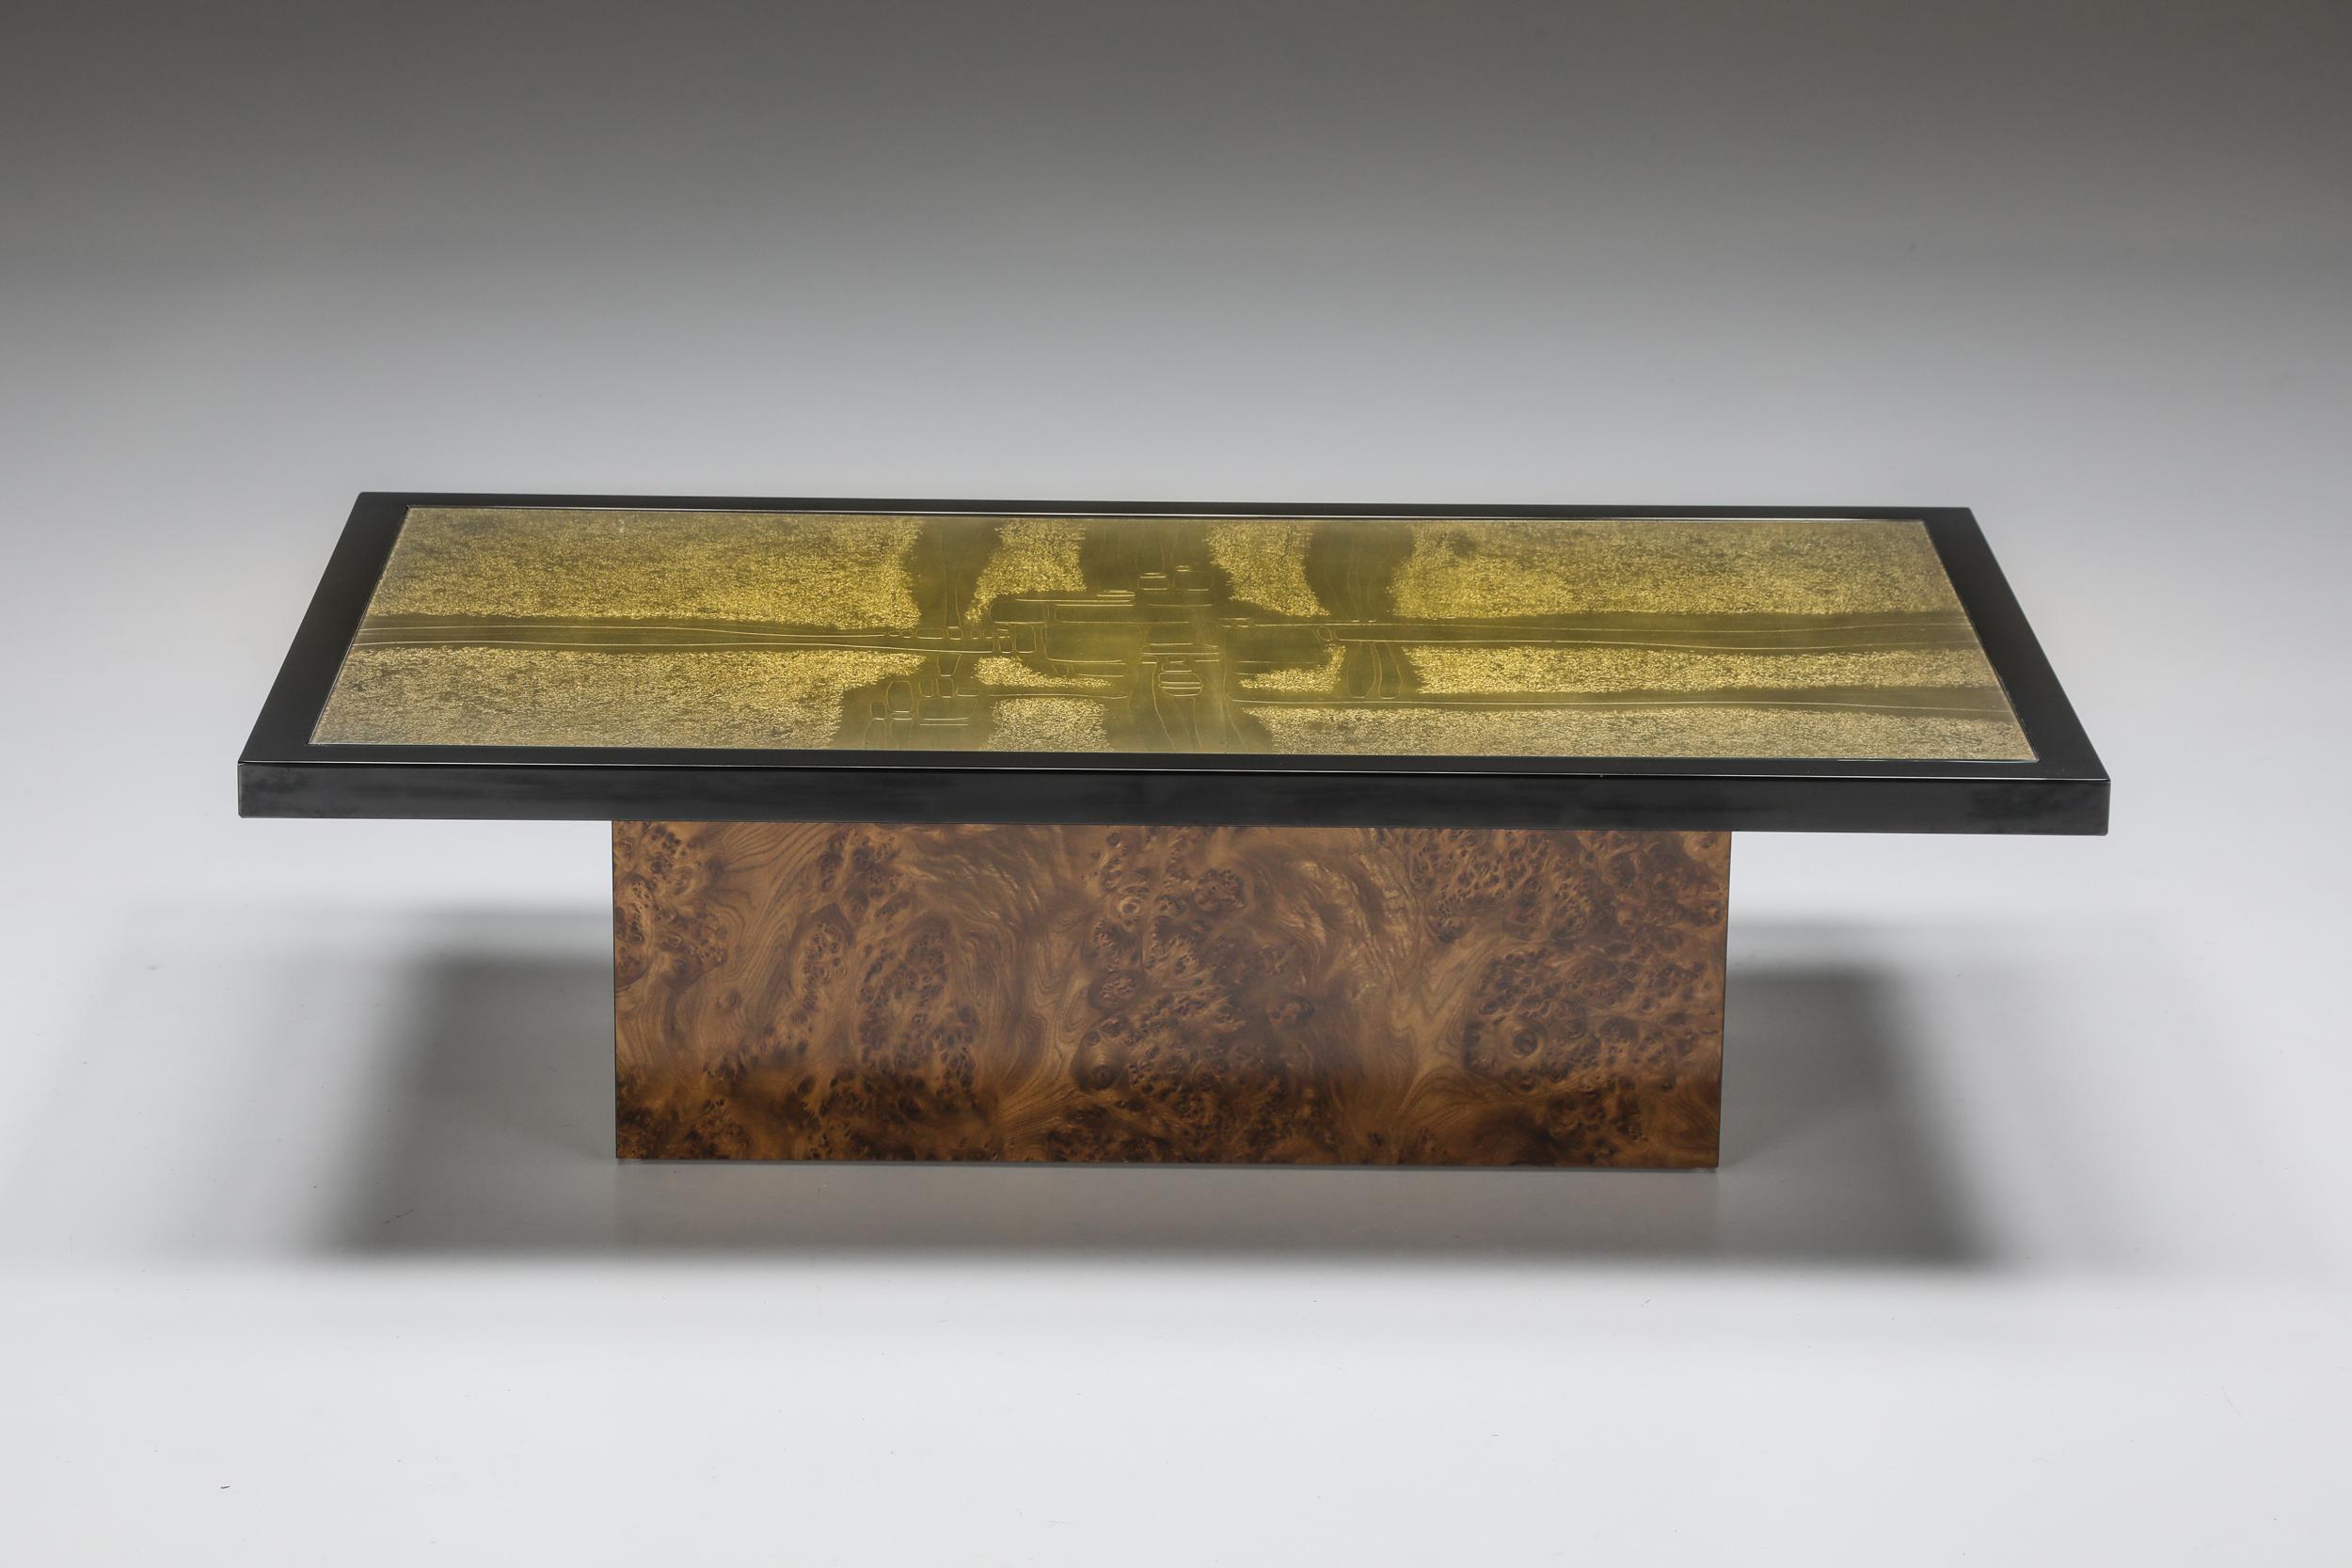 Coffee table; Maho design; side table; Belgium: 1970's; George Matthias; Armand Jonckers, Love creation; Christian Heckscher;

Brass etched rectangular coffee table made in Belgium in the 1970s. The artwork is signed and numbered Maho 3/250.